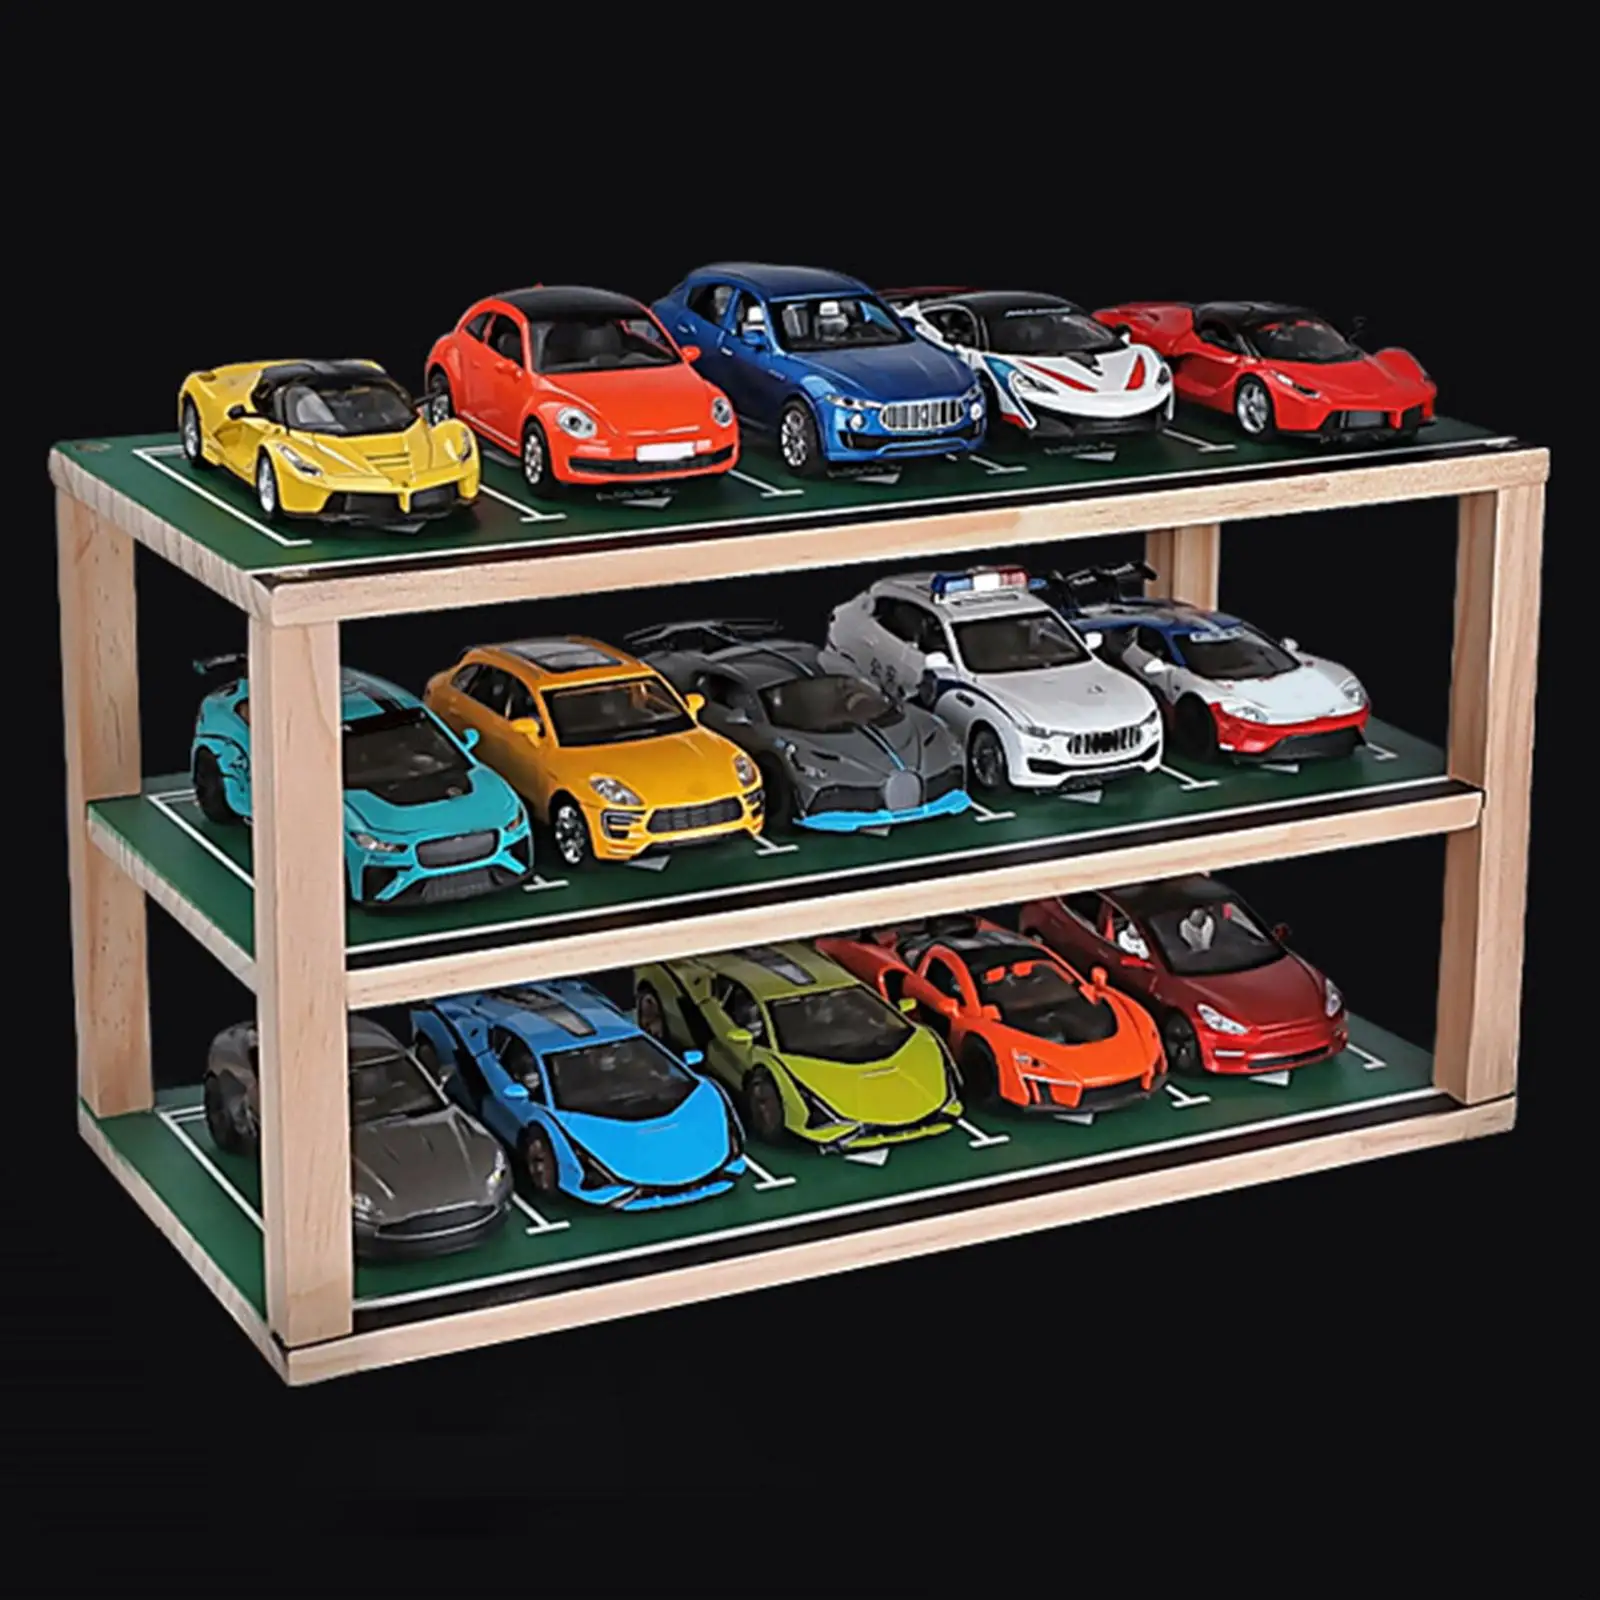 Three Story Car Model Display Case Garage Model Ornament Parking Lot 1:32 Scale Simulation for Playset Showcase Organizer Toy